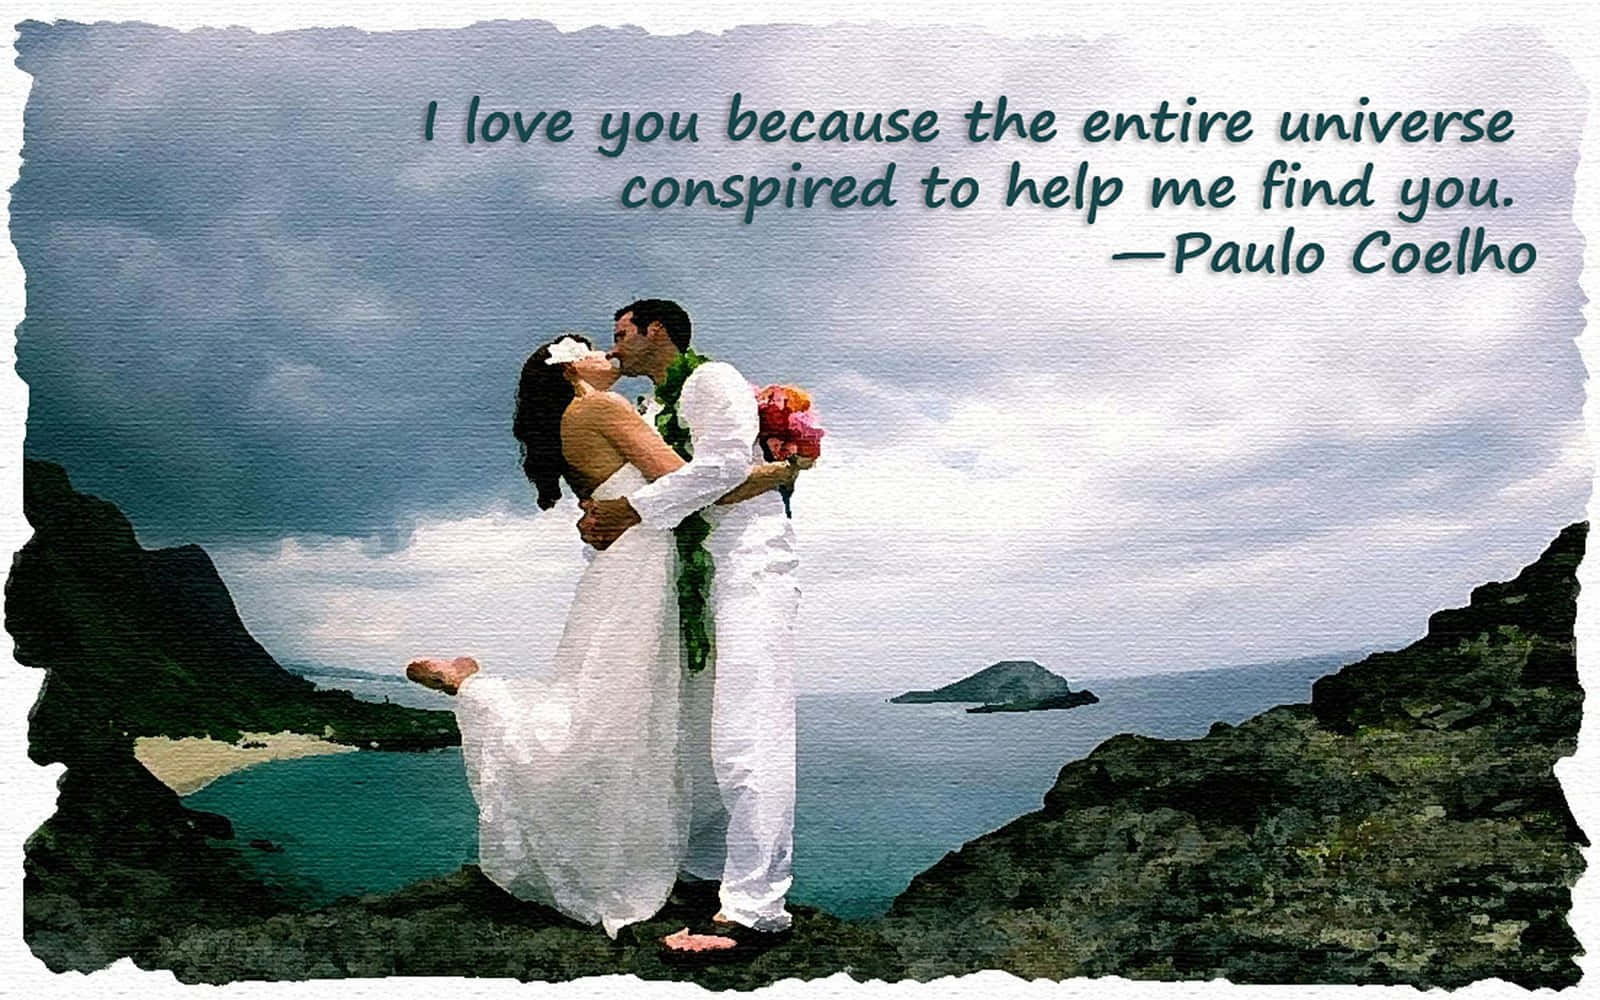 Universe Conspired Love Quote Wallpaper